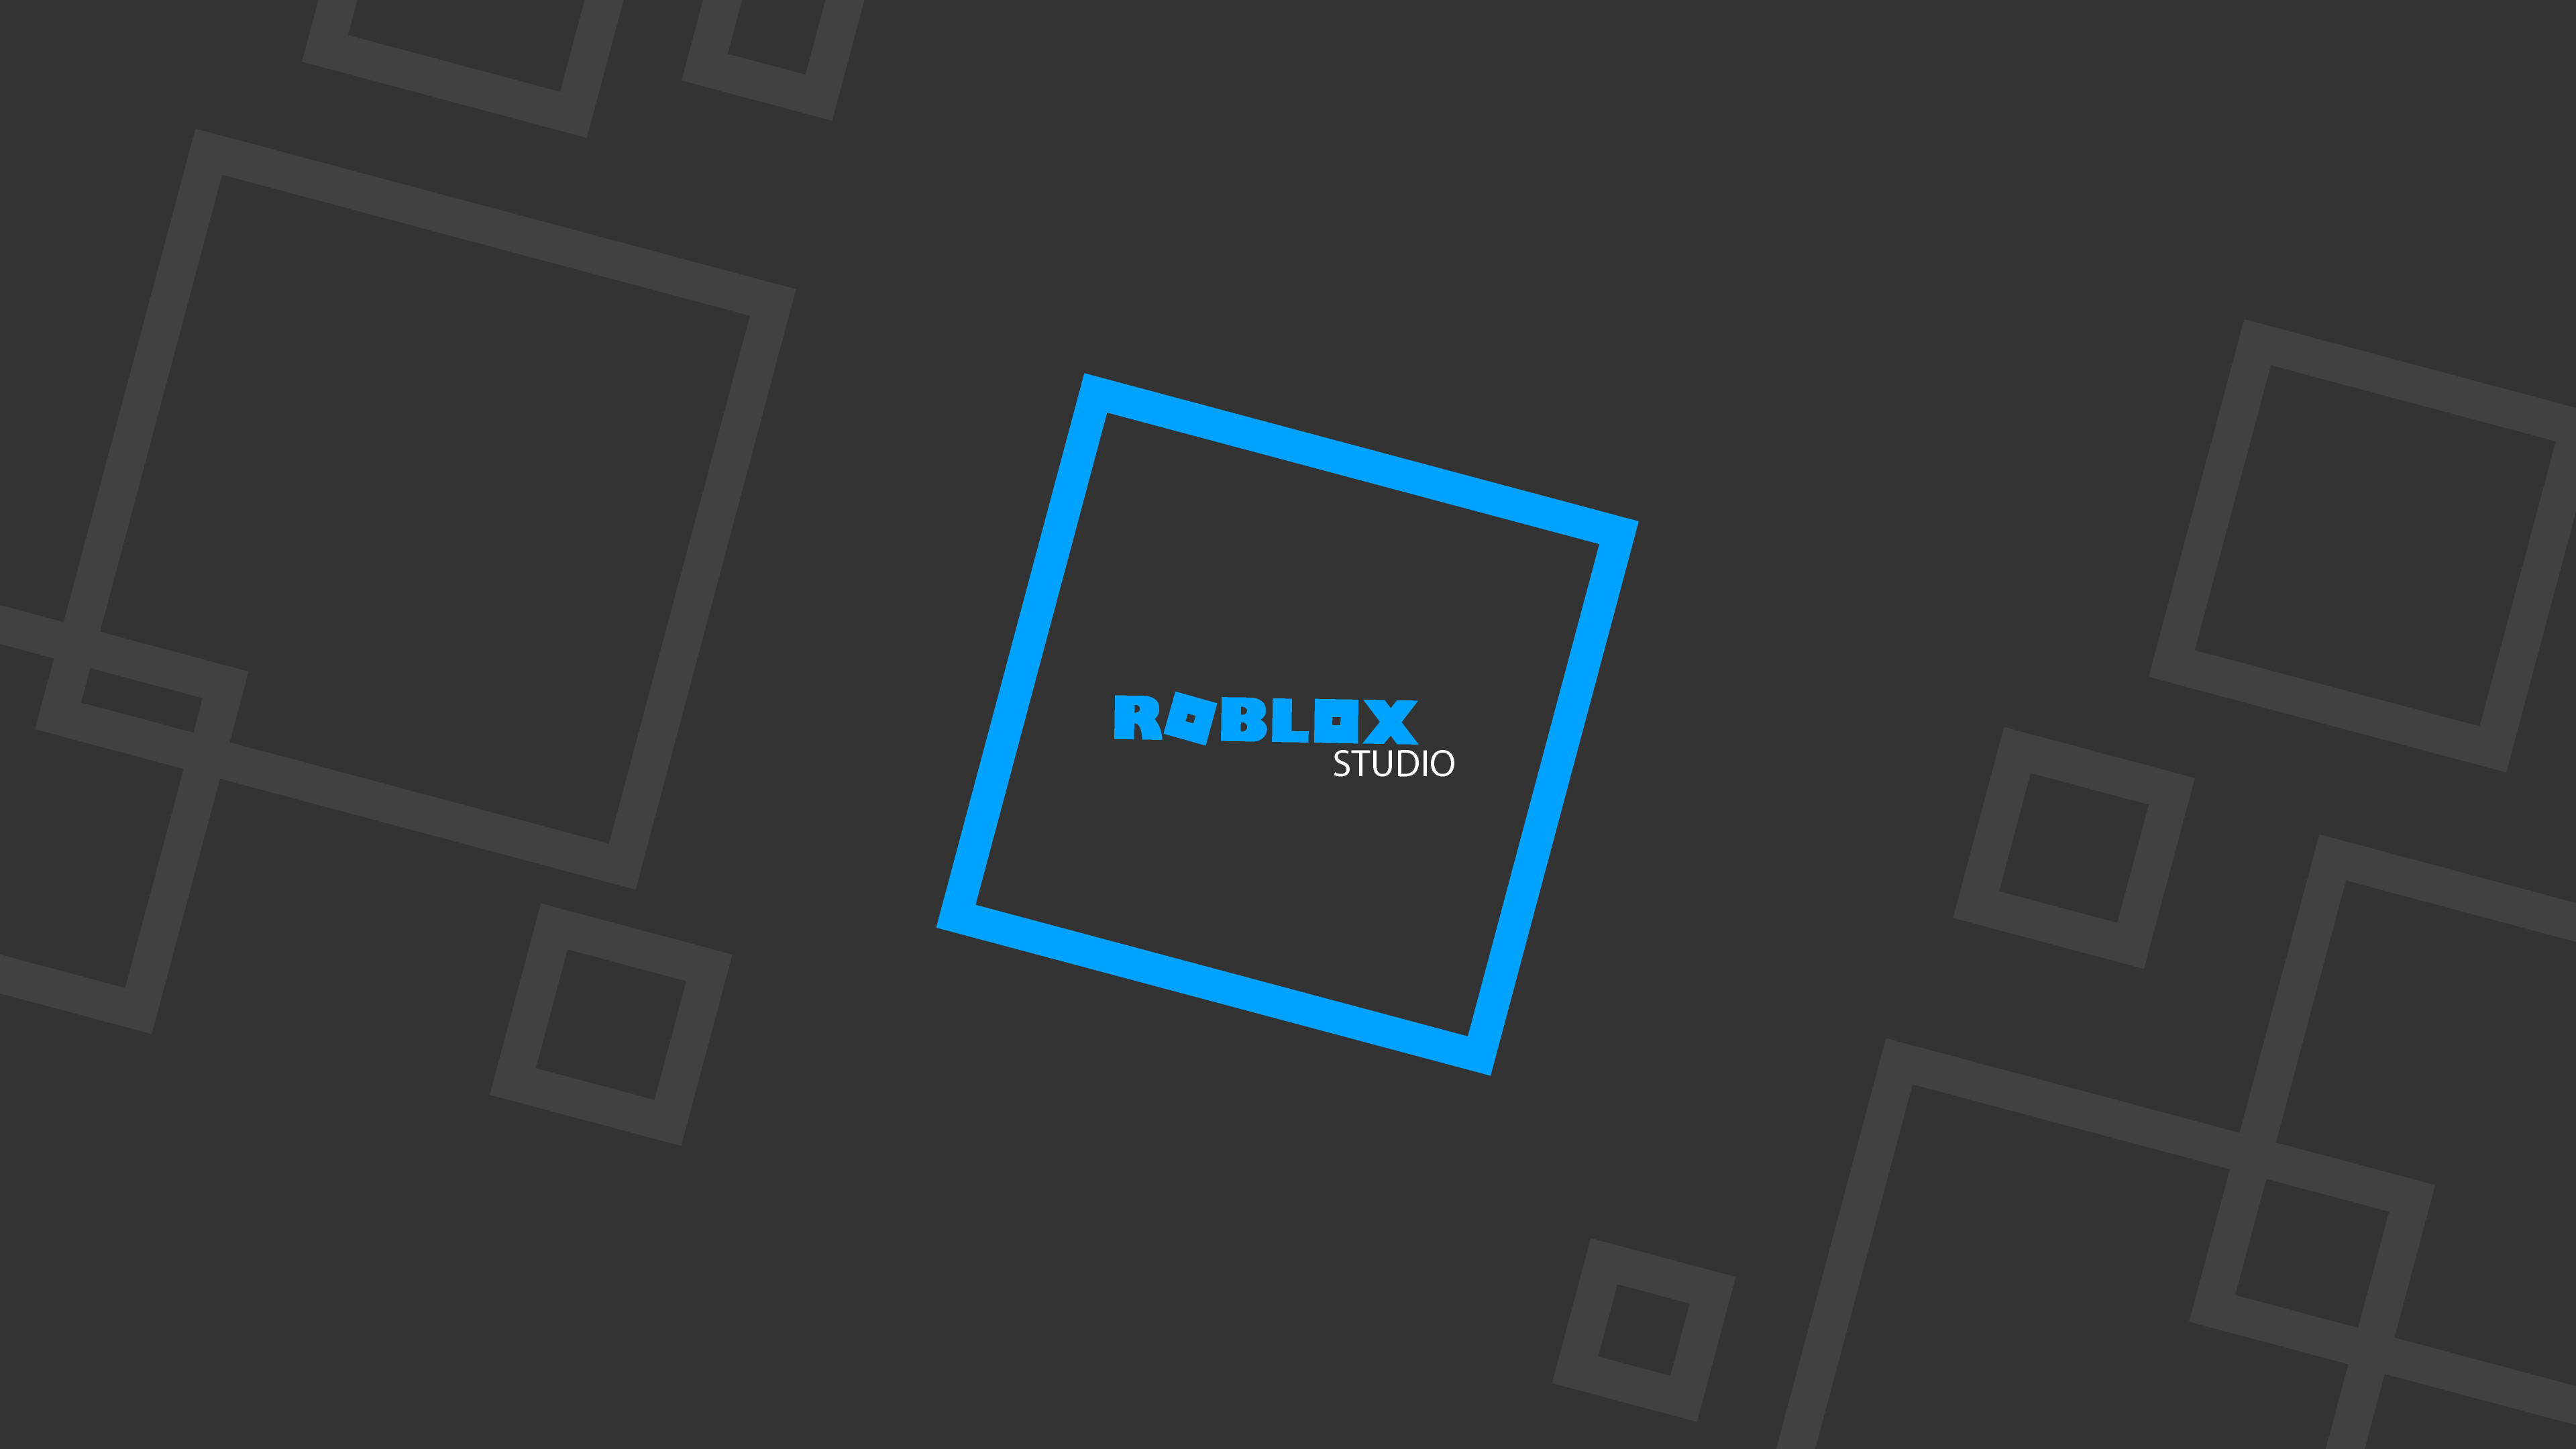 Roblox: An online game platform and game creation system. 3840x2160 4K Background.